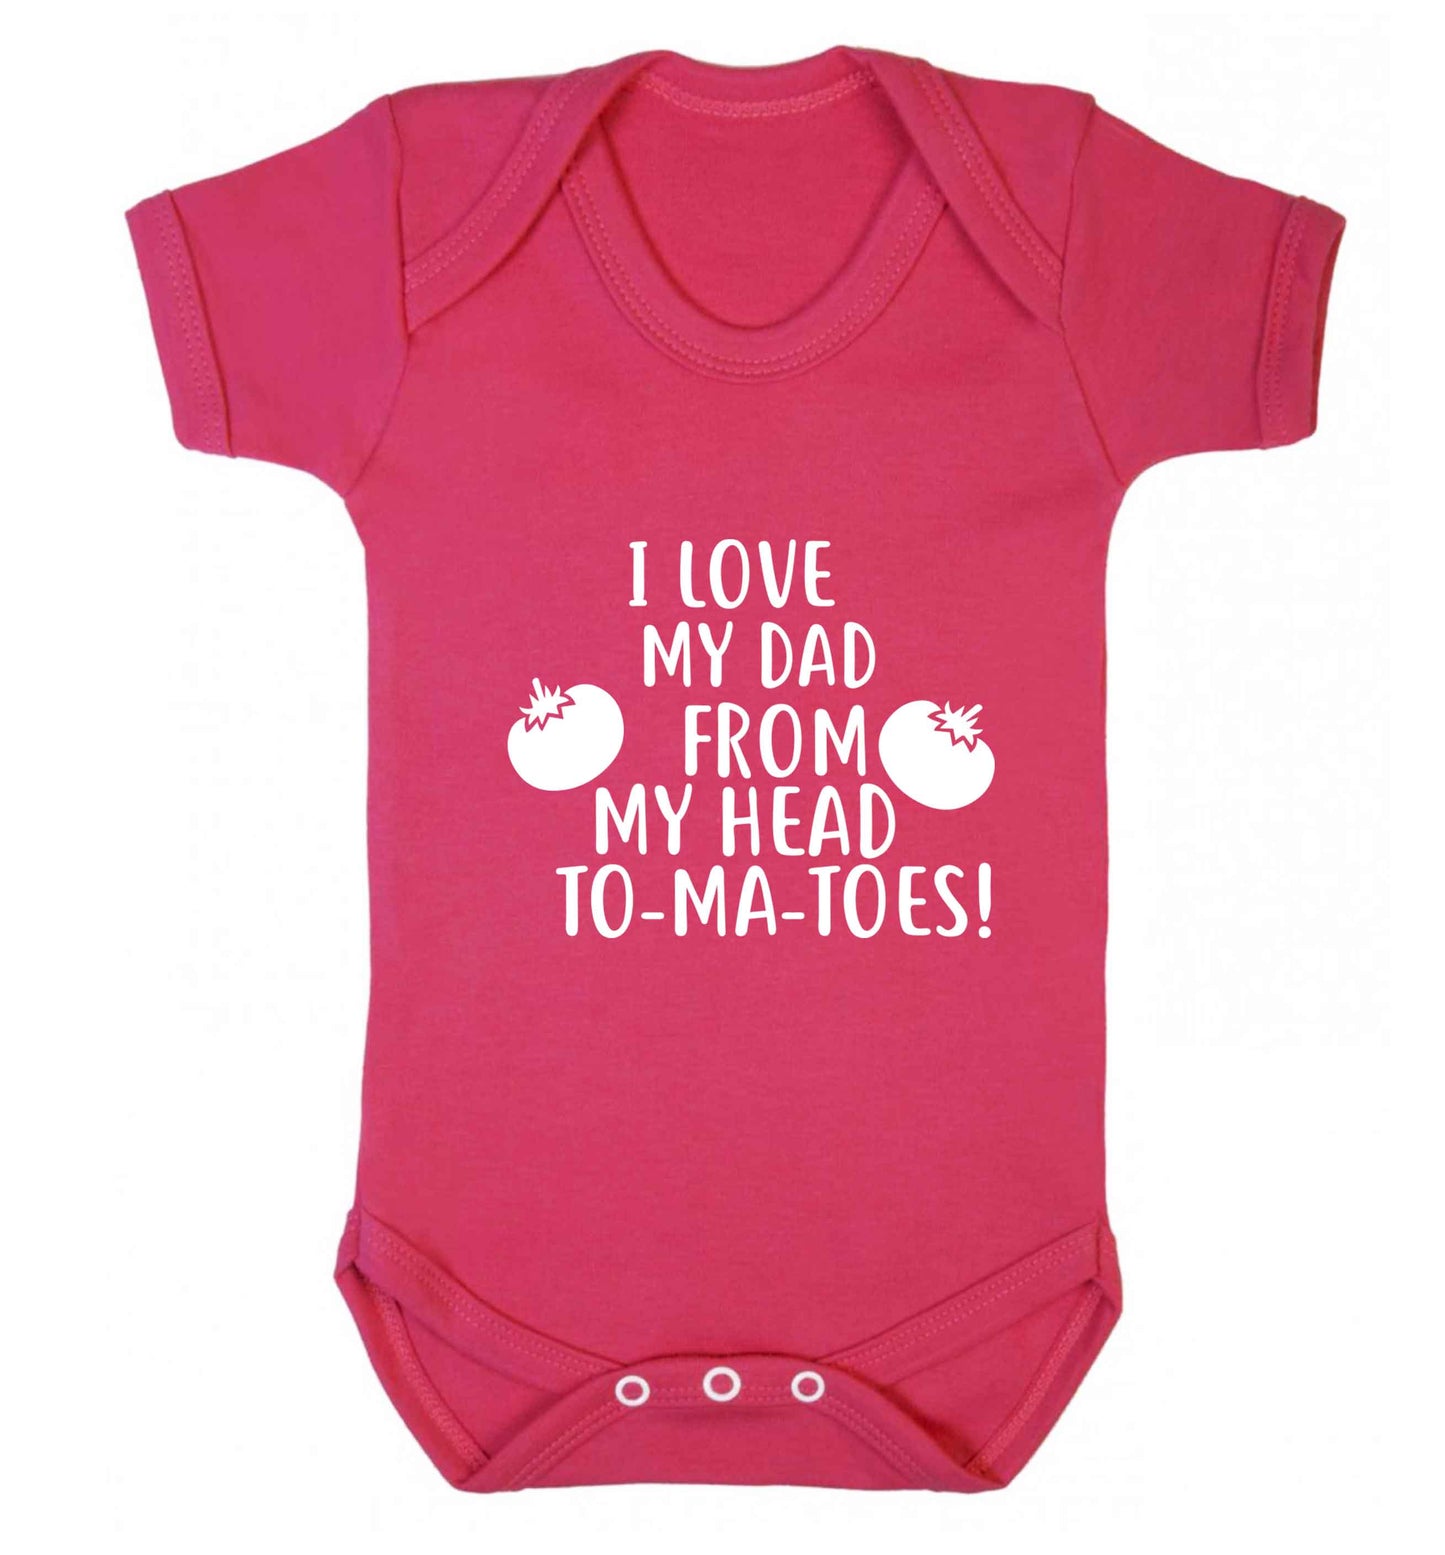 I love my dad from my head to-ma-toes baby vest dark pink 18-24 months